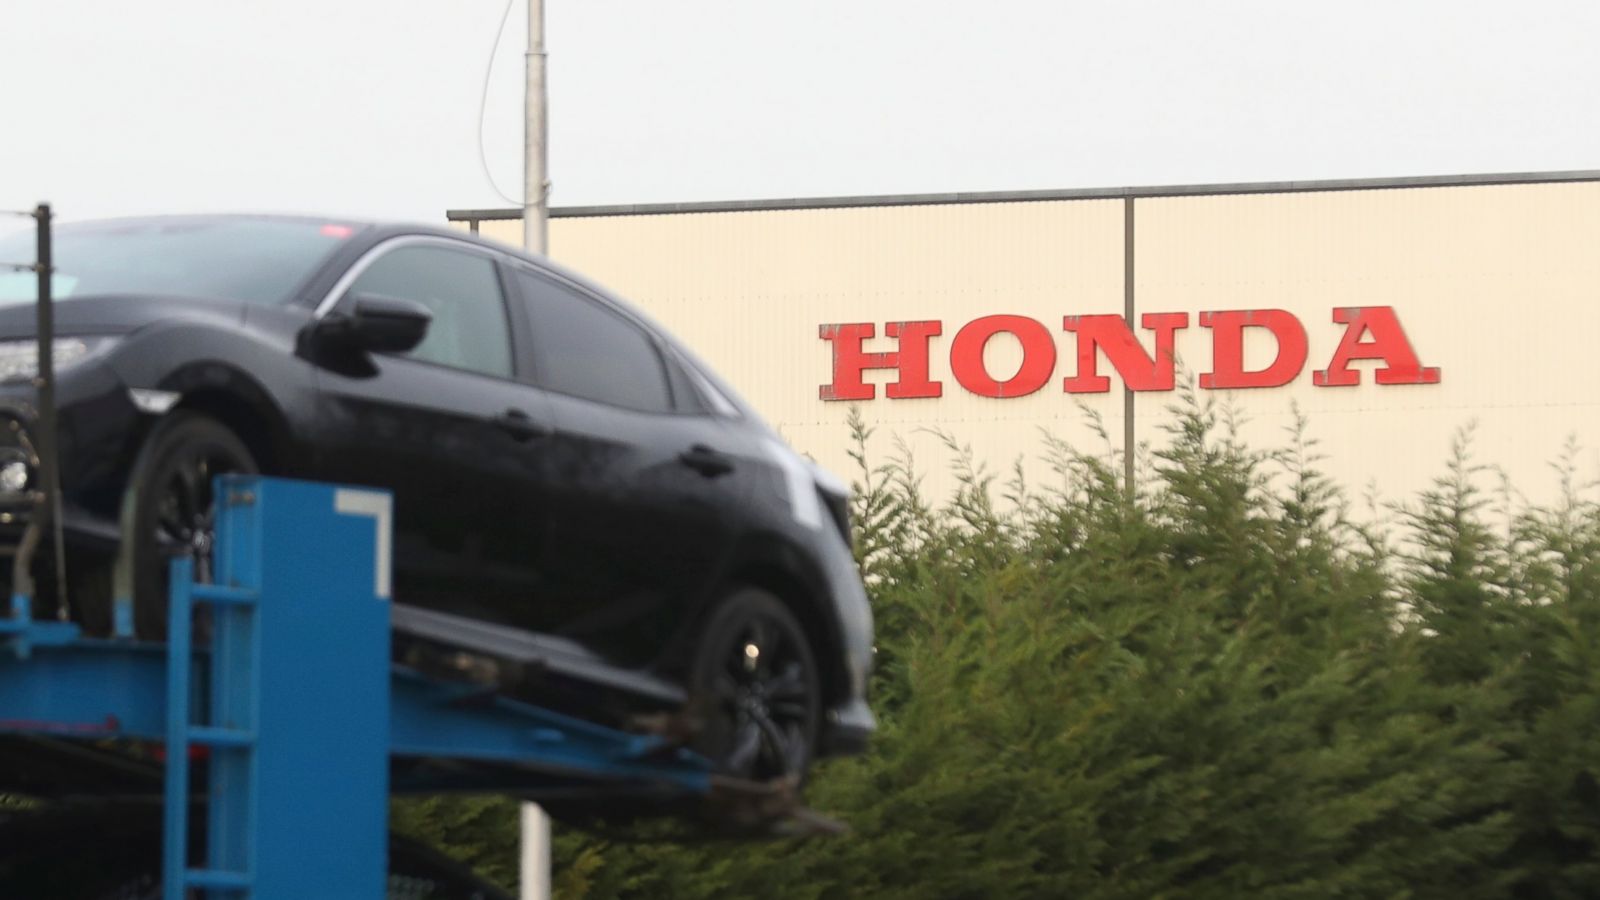 Honda confirms its intention to convert its Ontario plant to hybrid vehicles.